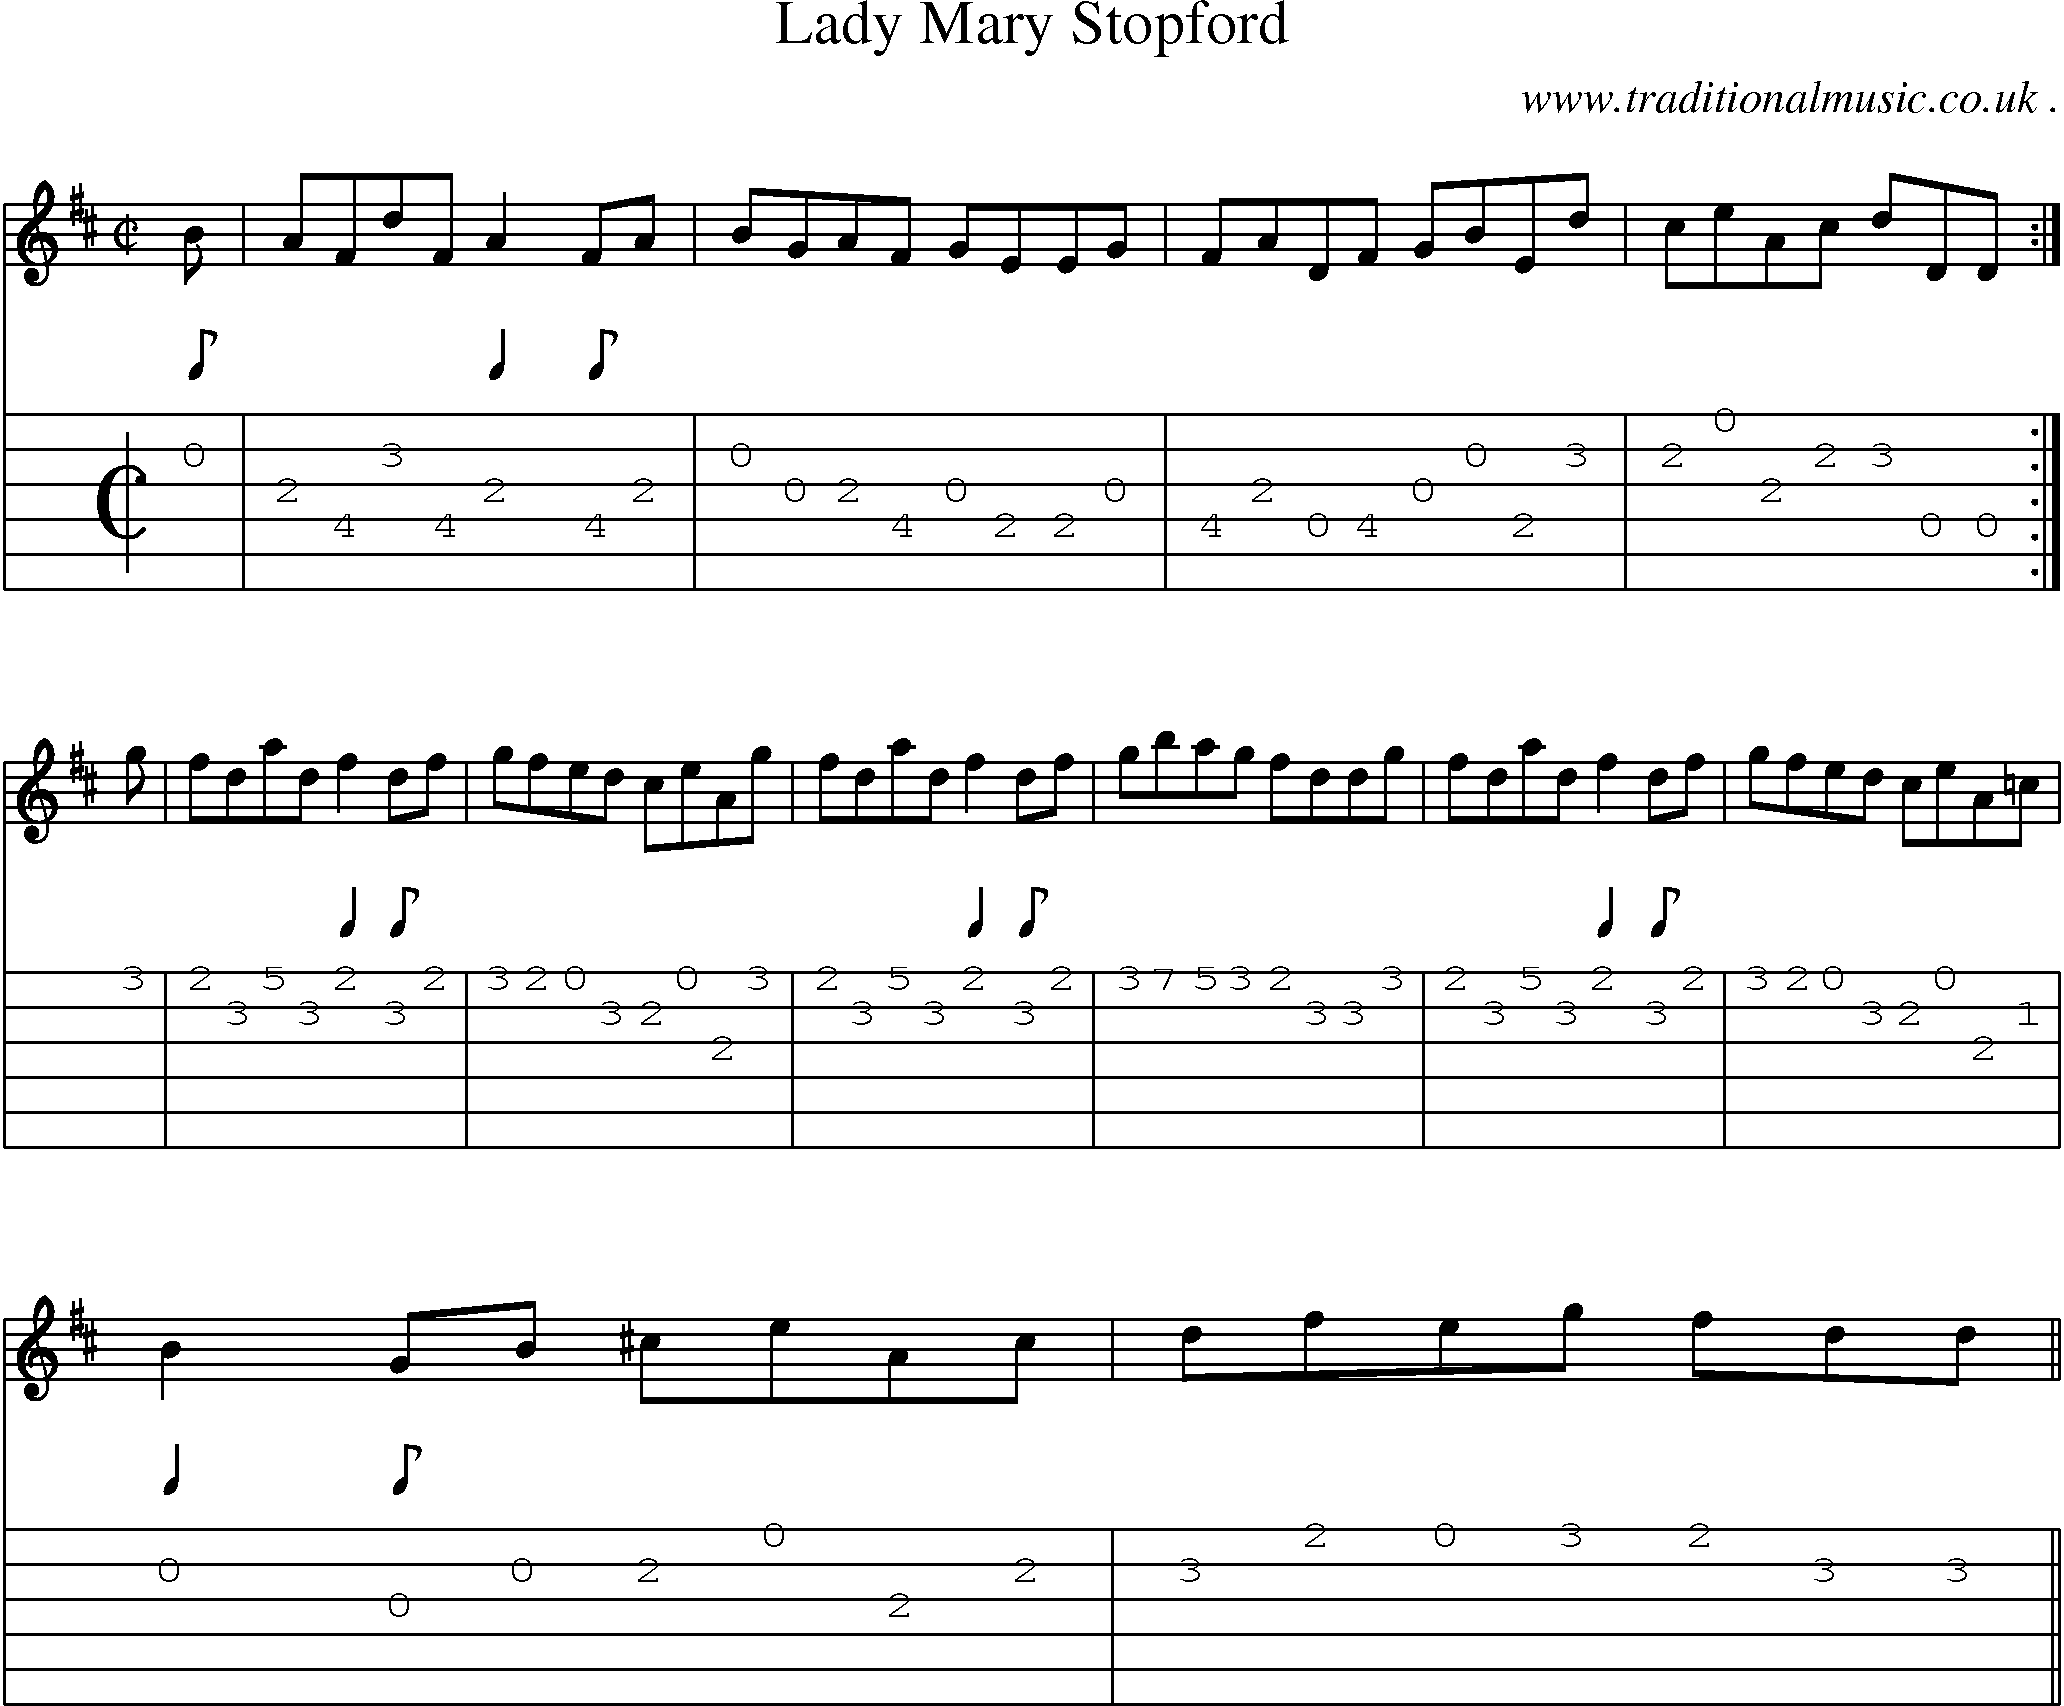 Sheet-music  score, Chords and Guitar Tabs for Lady Mary Stopford